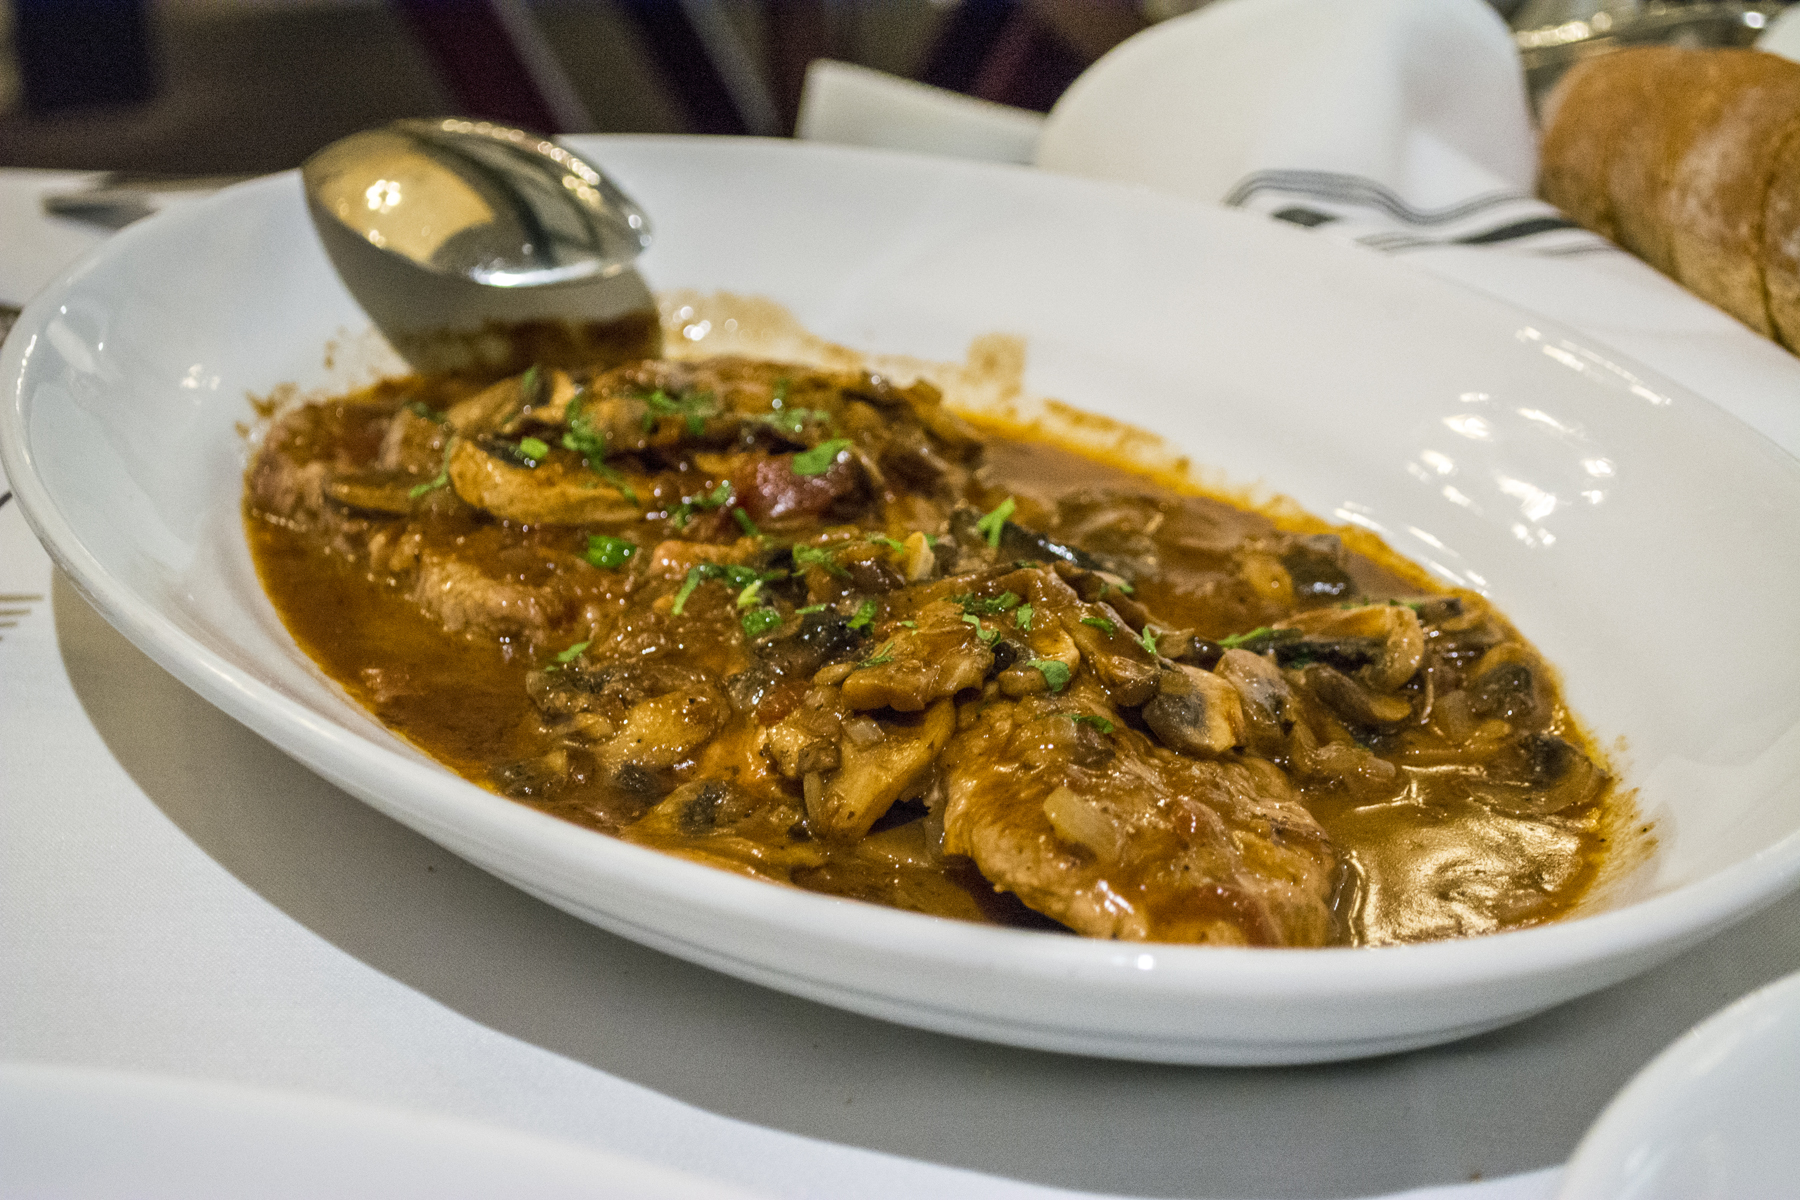   The Veal Marsala ($24/$33) is served with mushrooms and a Marsala wine sauce.   Long Islander News photos/Barbara Fiore  